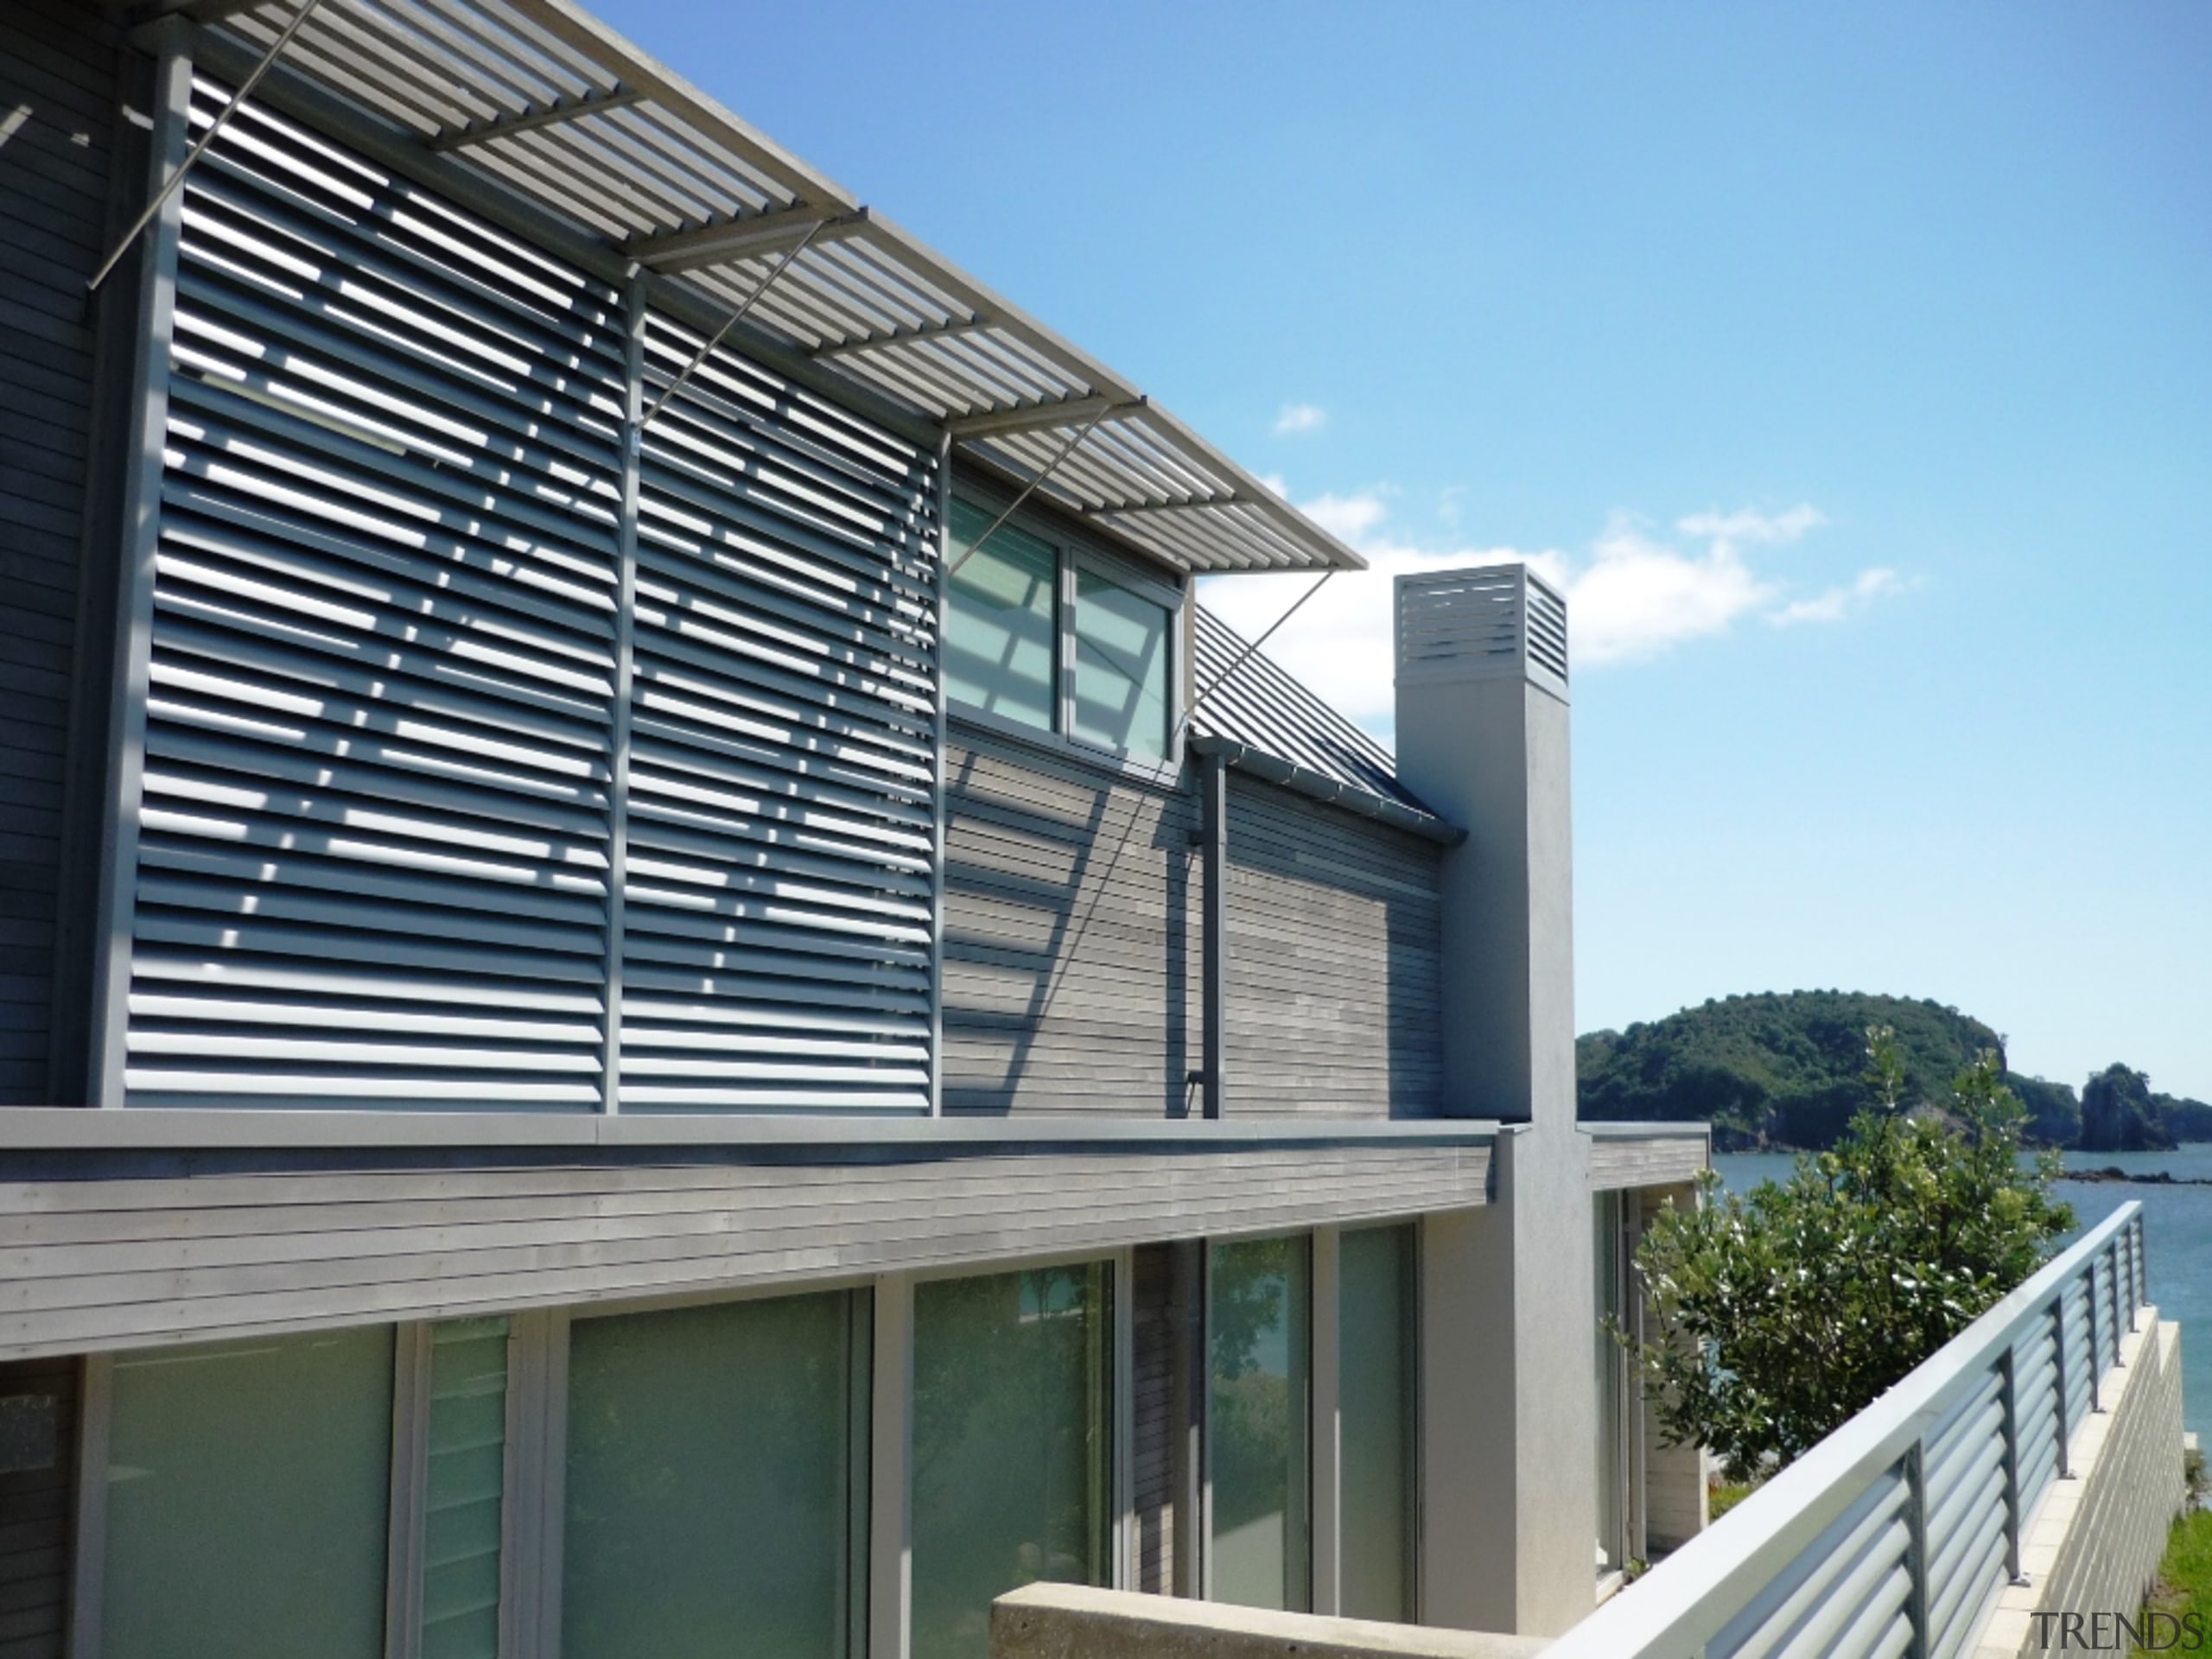 78580_louvretec-new-zealand-ltd_1556758086 - architecture | balcony | building | architecture, balcony, building, corporate headquarters, daylighting, facade, glass, home, house, material property, metal, property, real estate, residential area, siding, window, teal, black